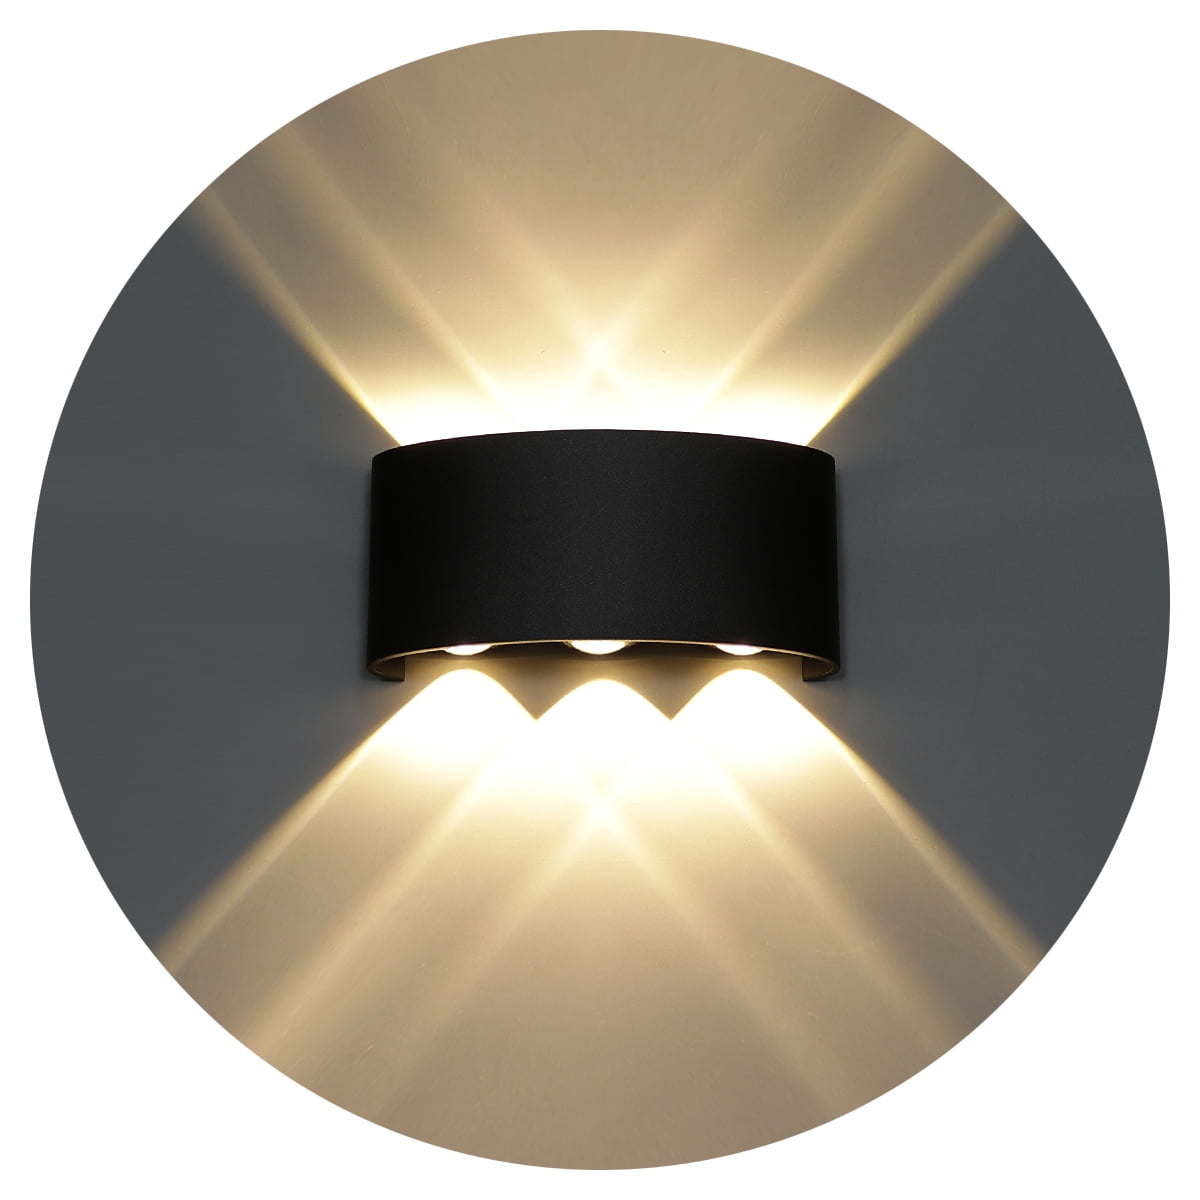 Bathroom Hallway Wall Lights Indoor 12W LED Up and Down Wall Lamp Black Aluminium Modern Sconce Wall Wash Lights for Living Room Bedroom Warm White 